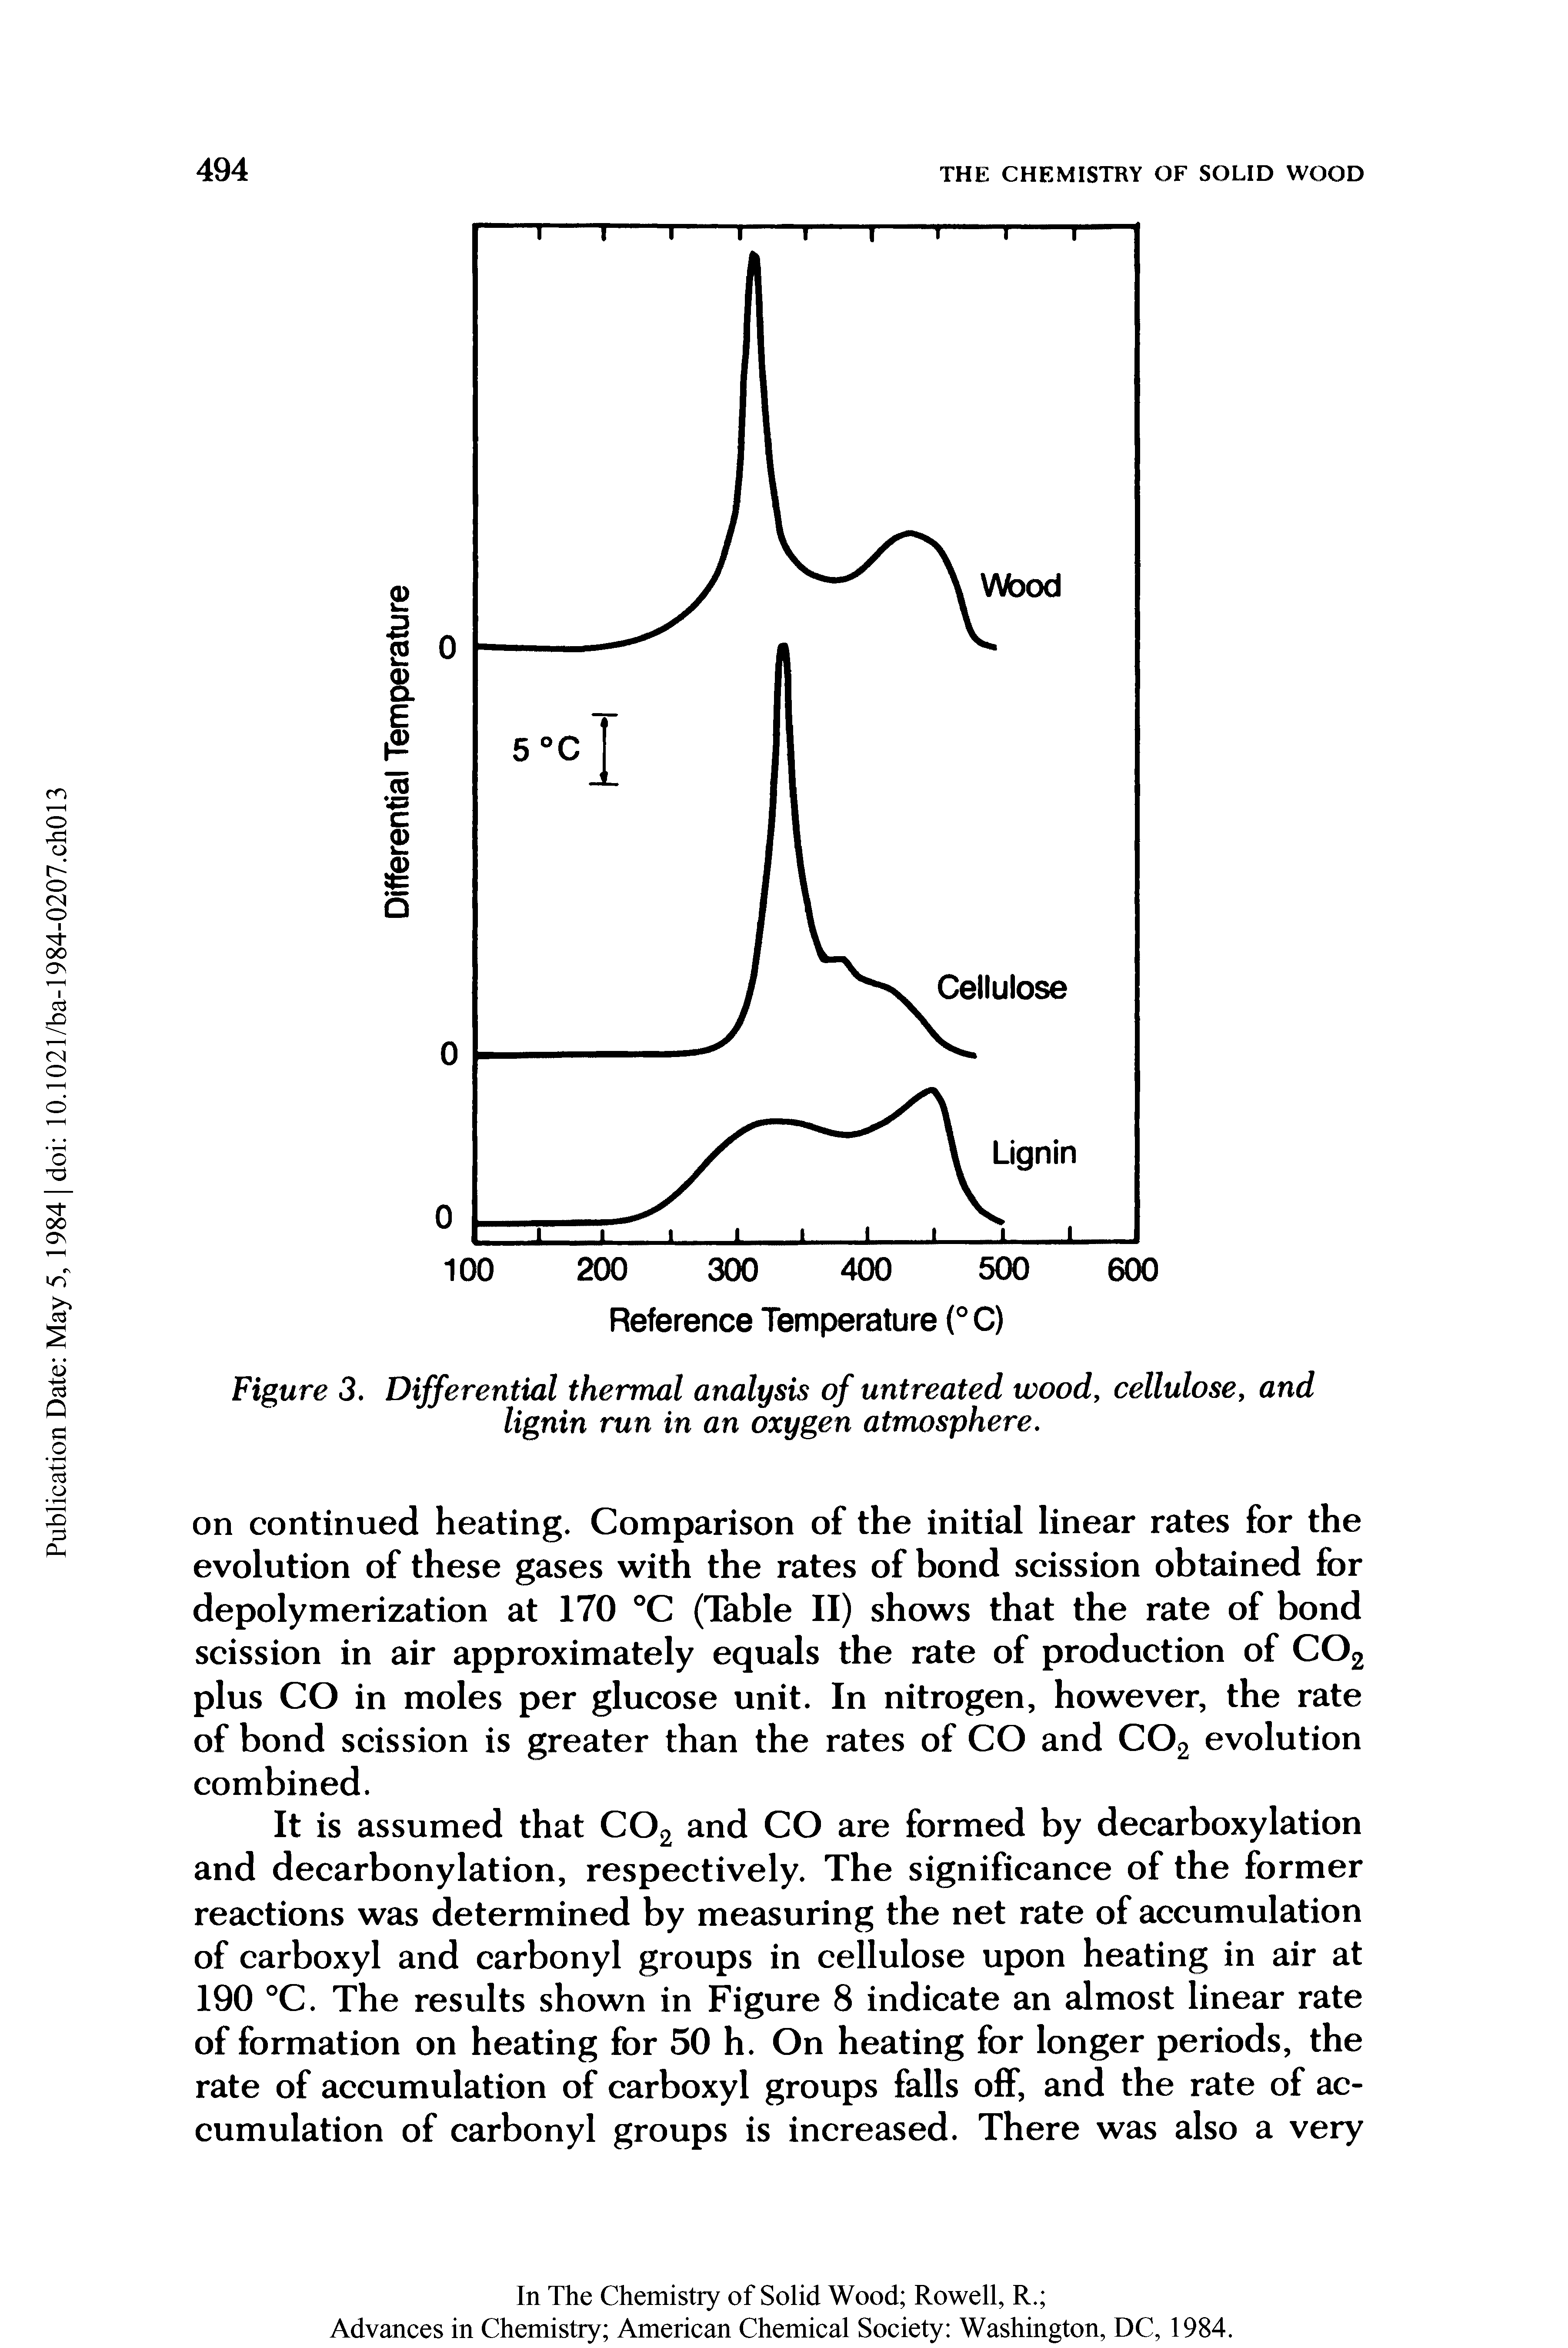 Figure 3. Differential thermal analysis of untreated wood, cellulose, and lignin run in an oxygen atmosphere.